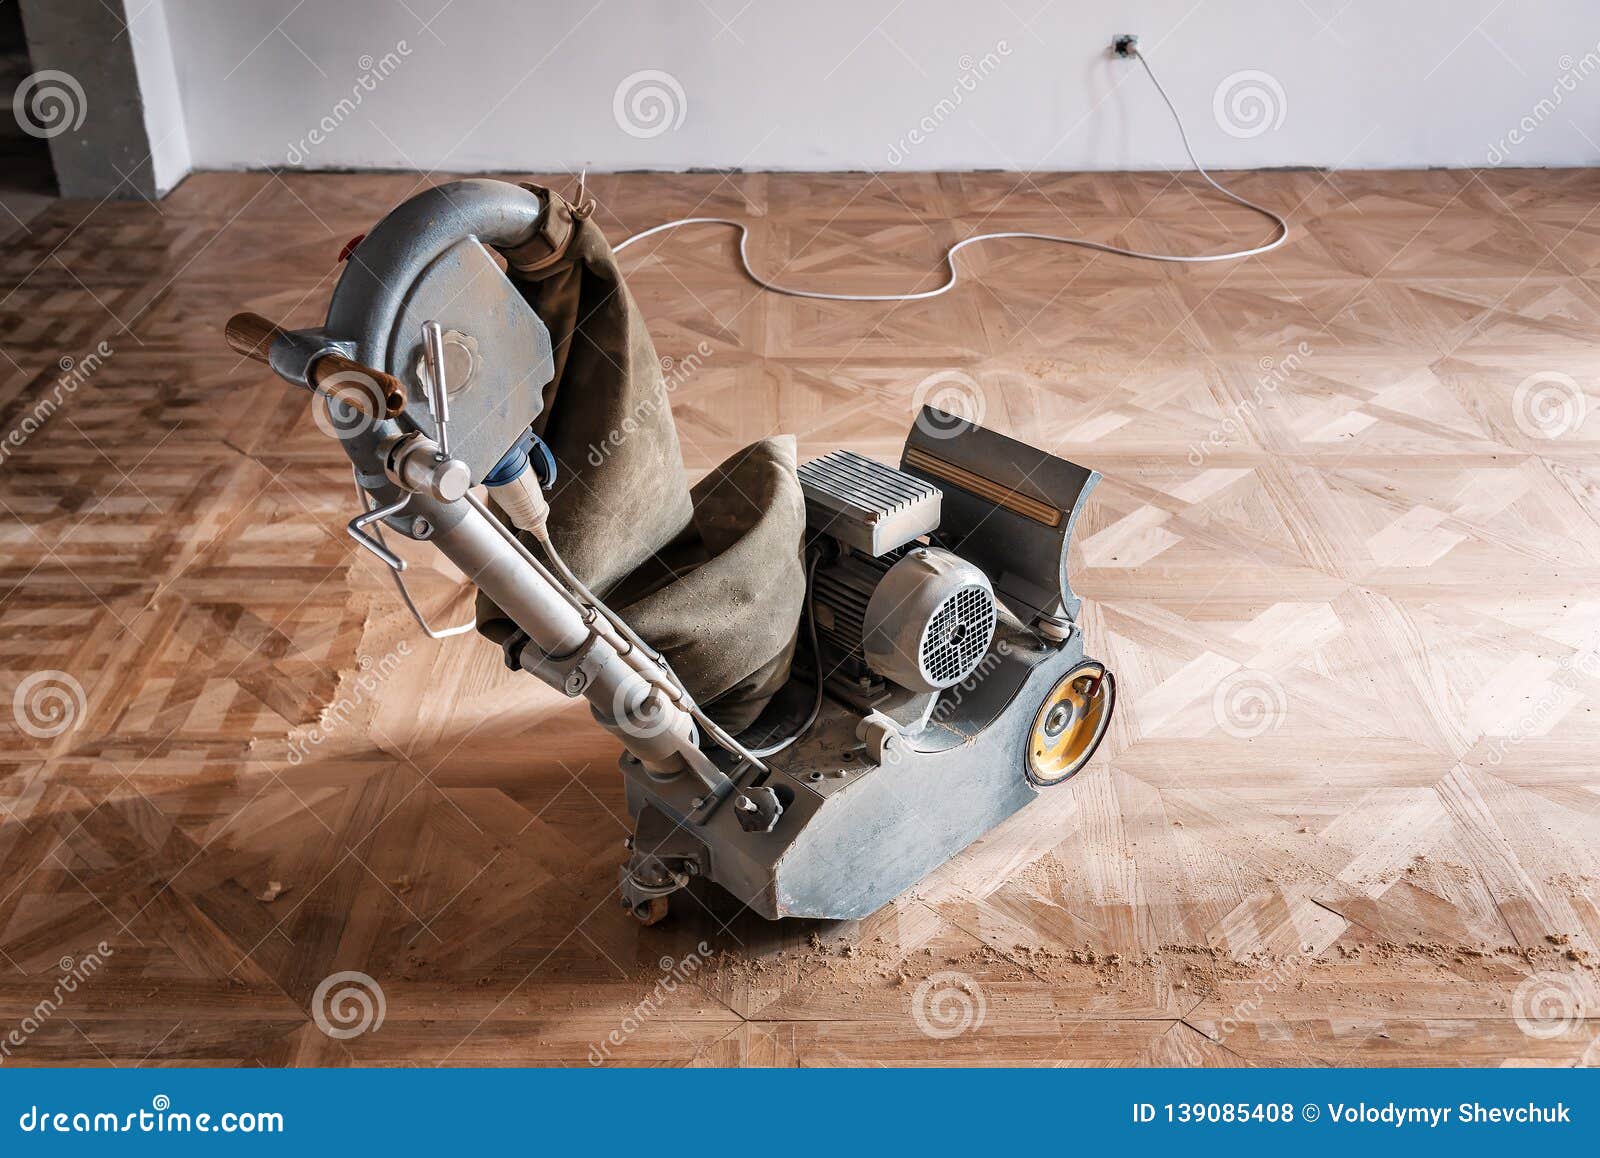 special grinding machine for parquet